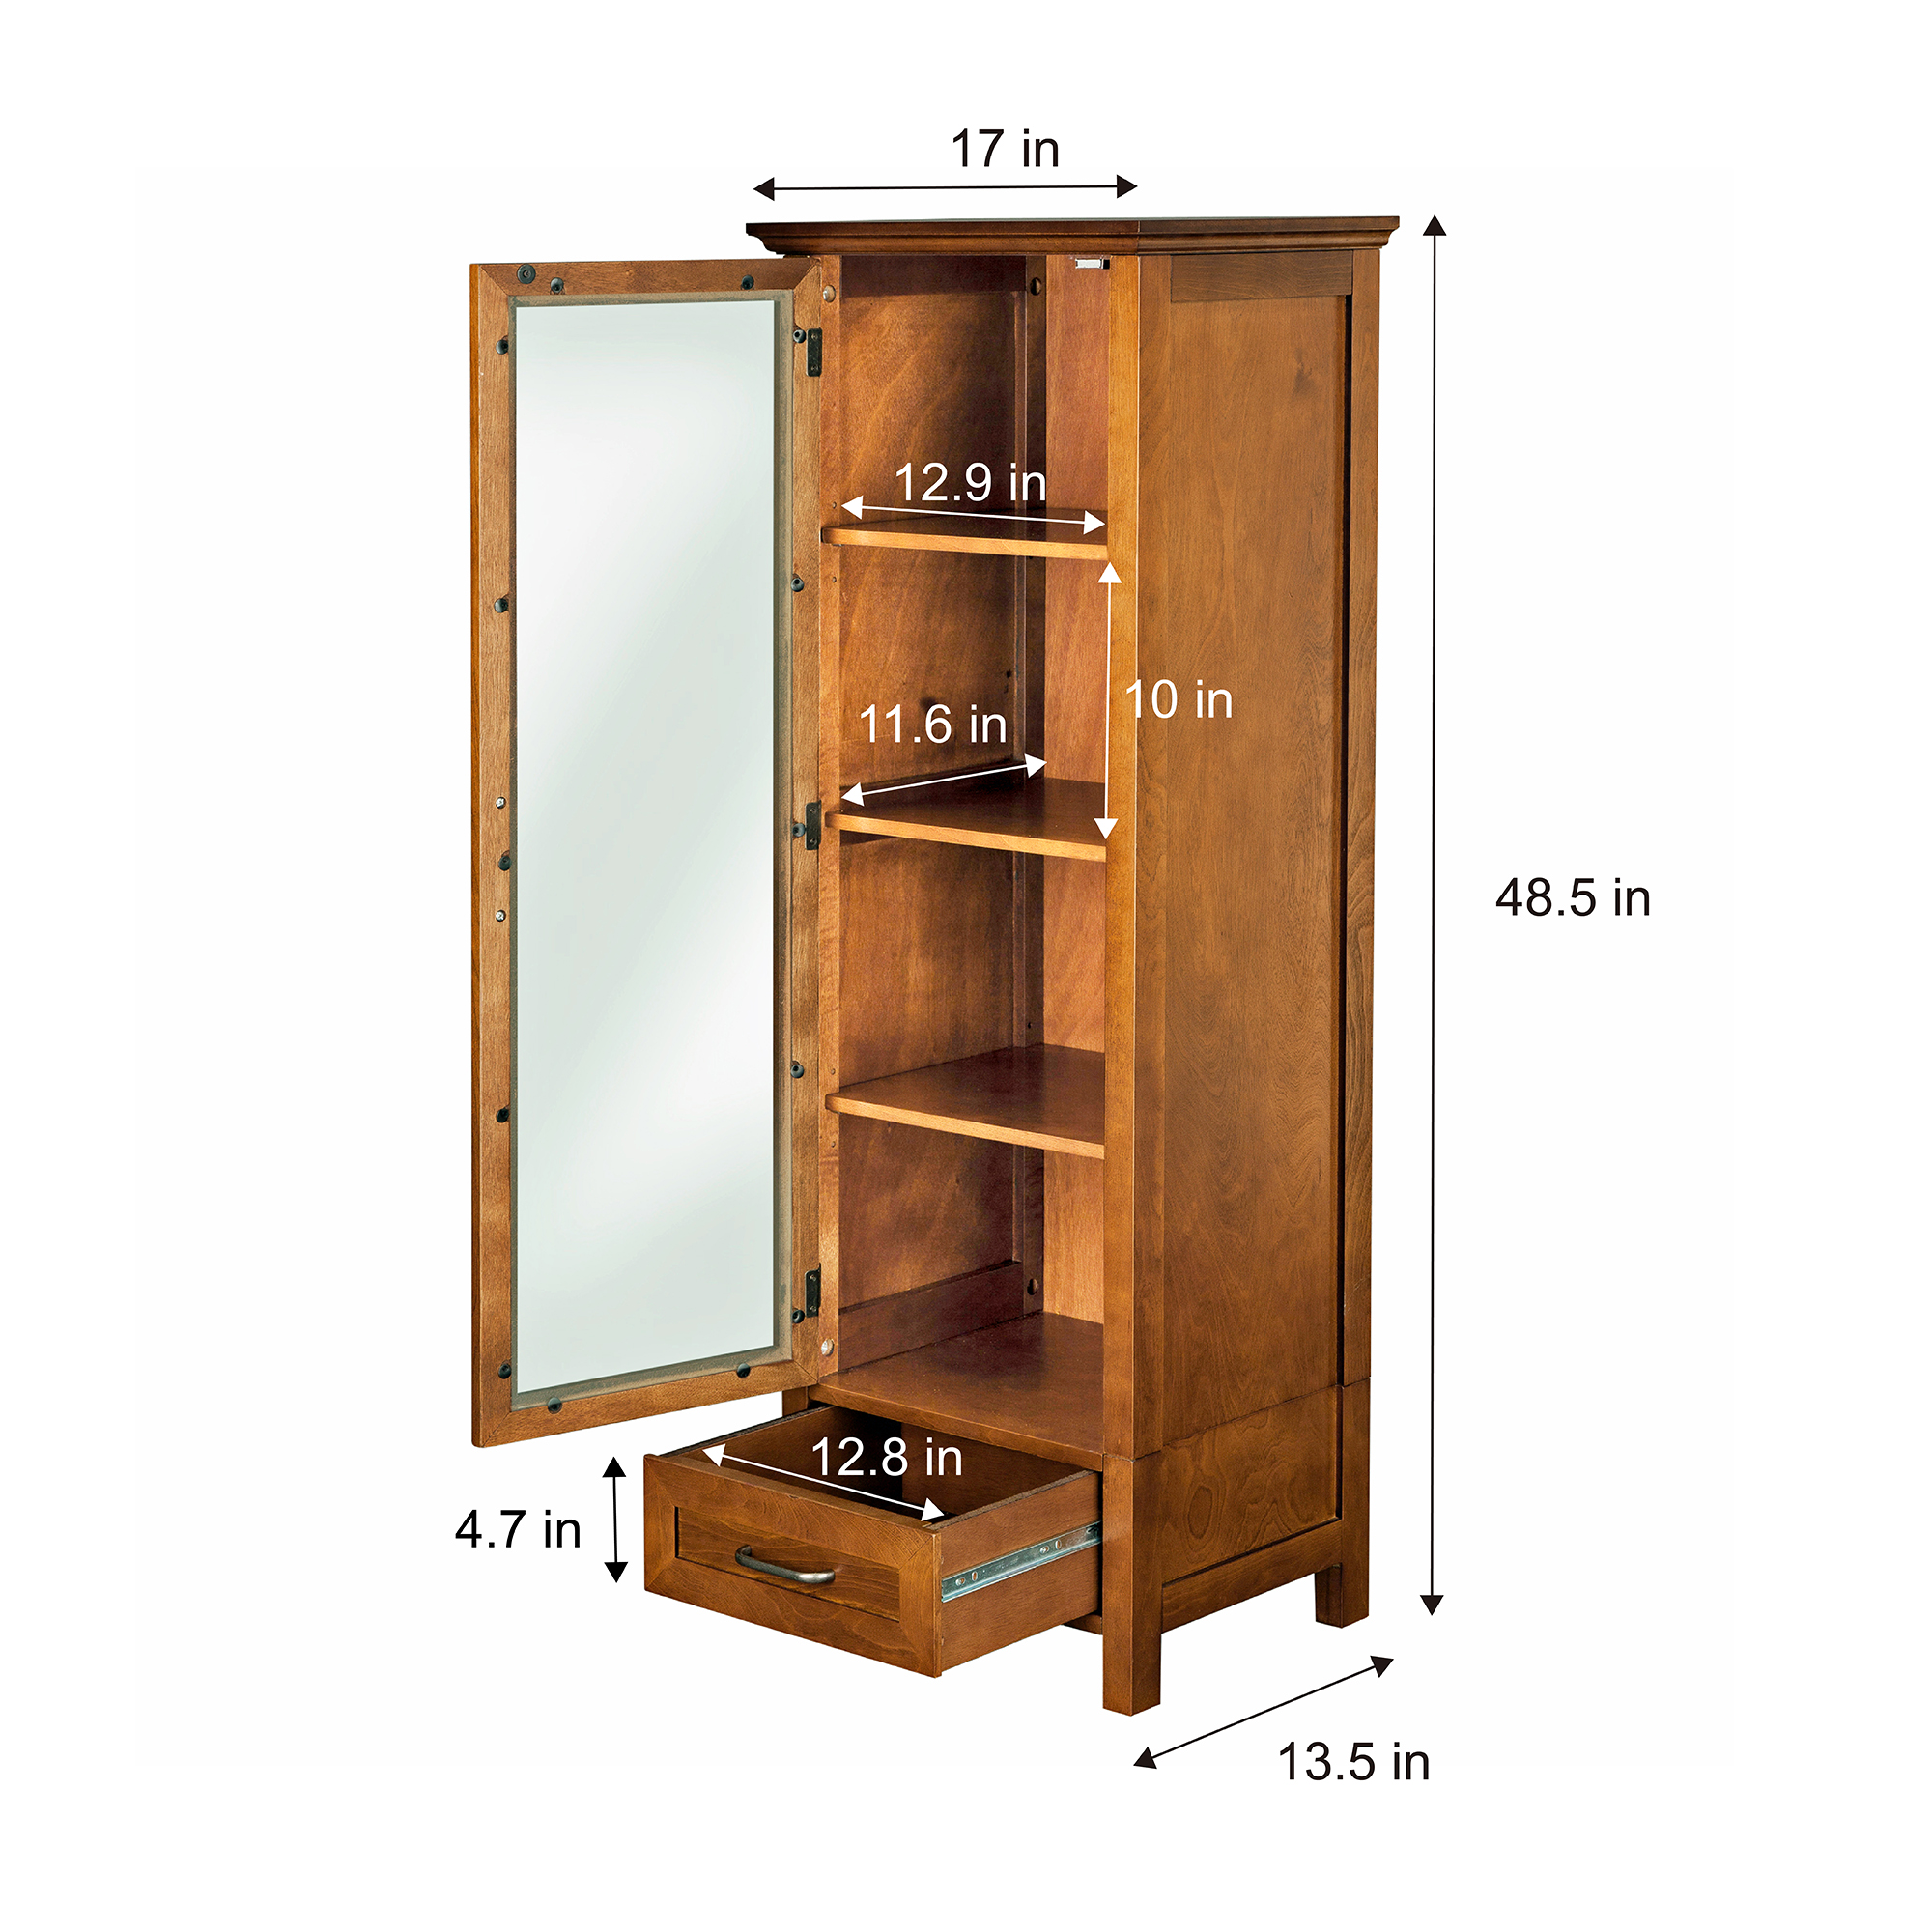 Elegant Home Fashions Calais Wood Linen Cabinet with Glass Door, Oil Oak - image 5 of 7